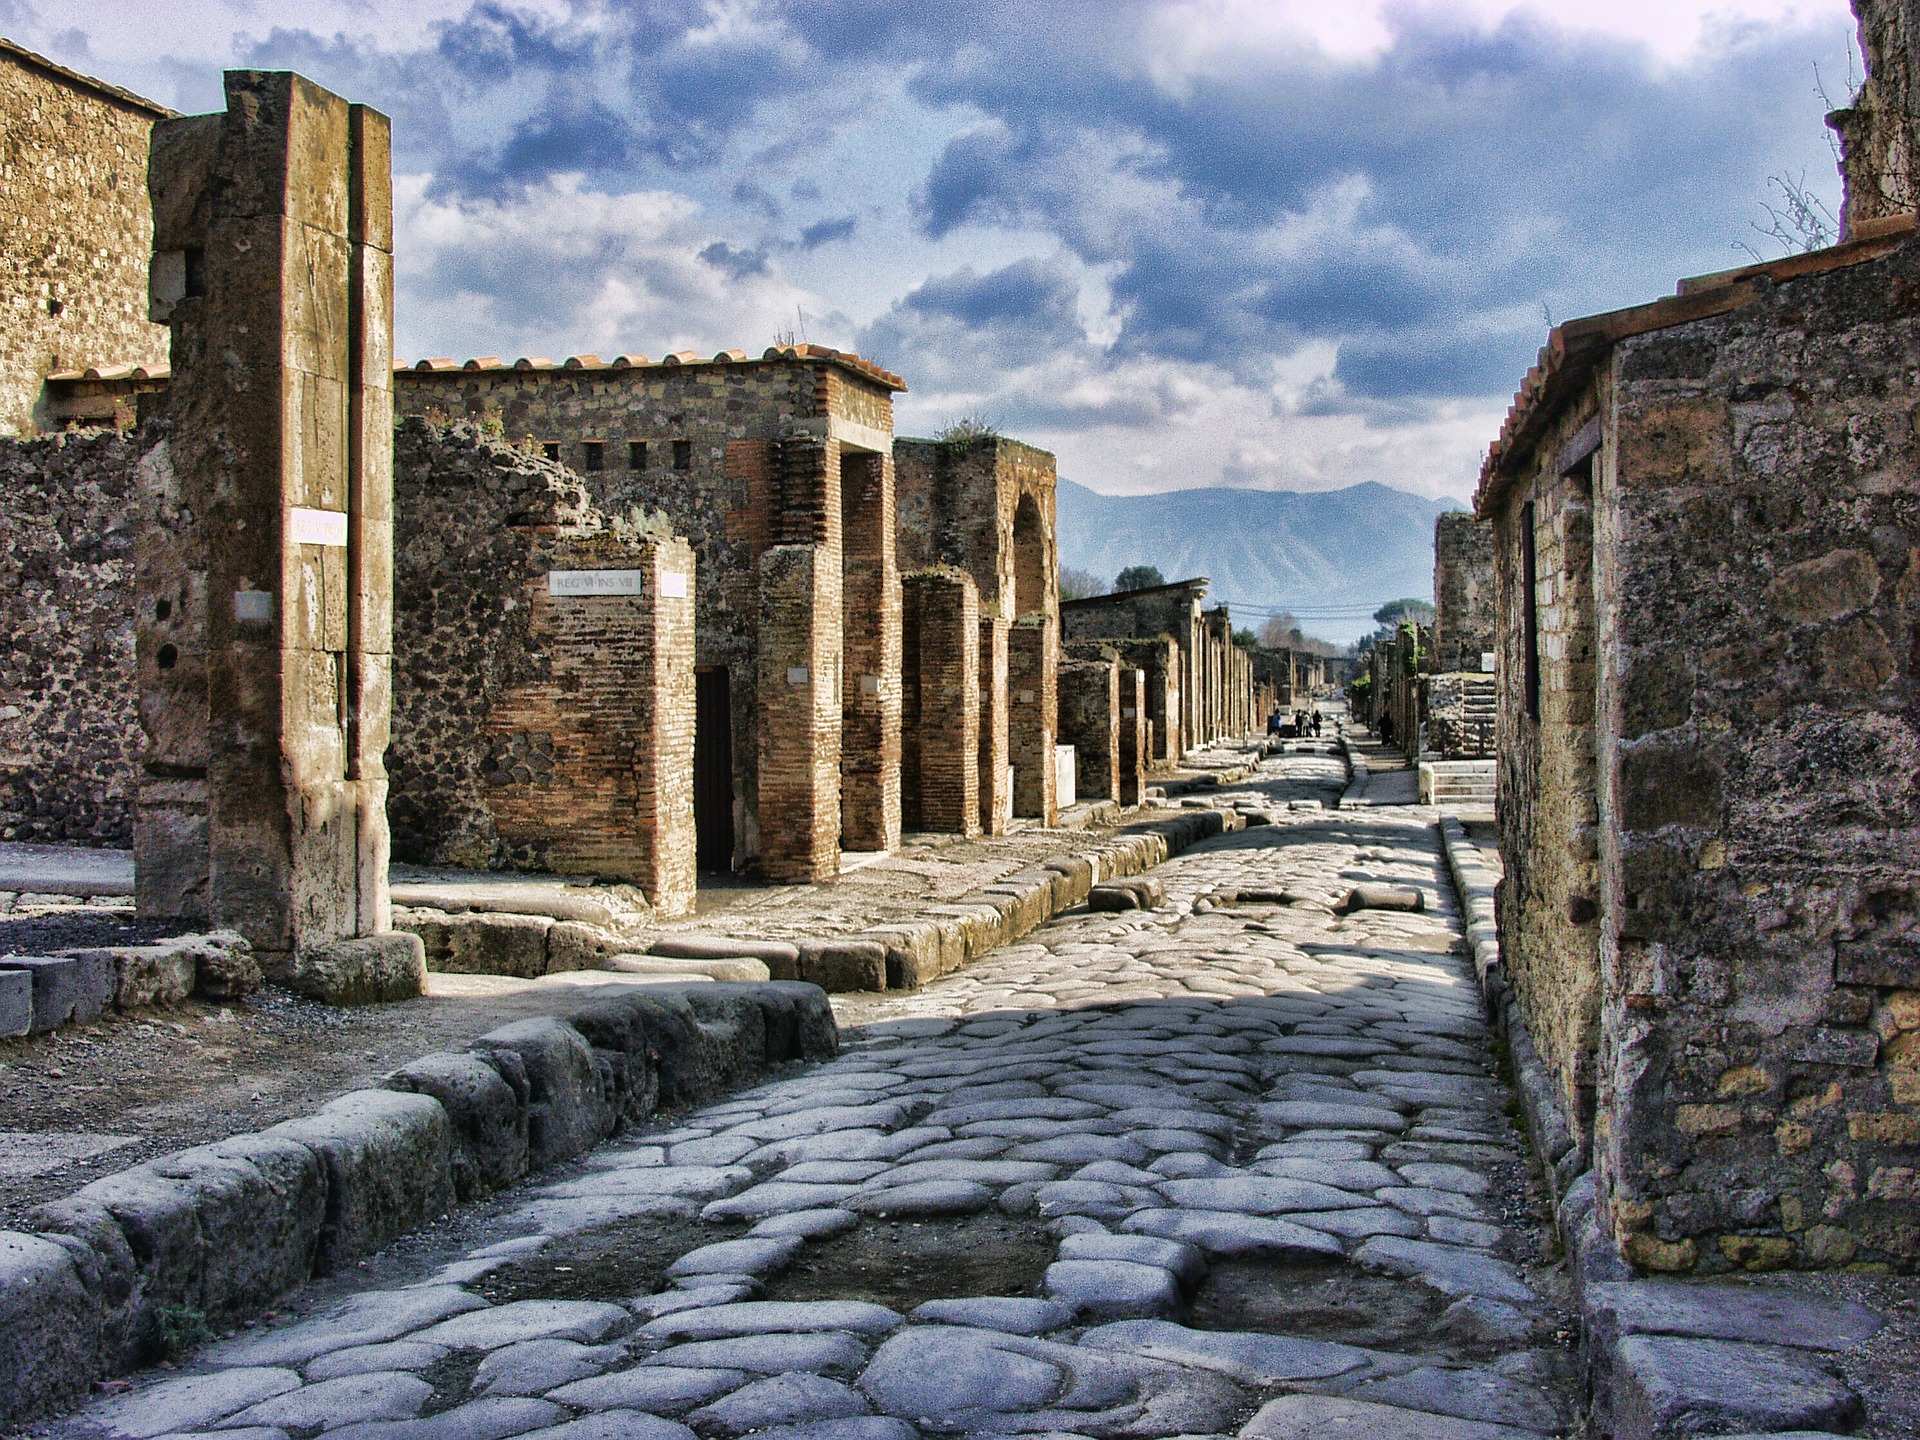 How long was Pompeii buried before it was uncovered?